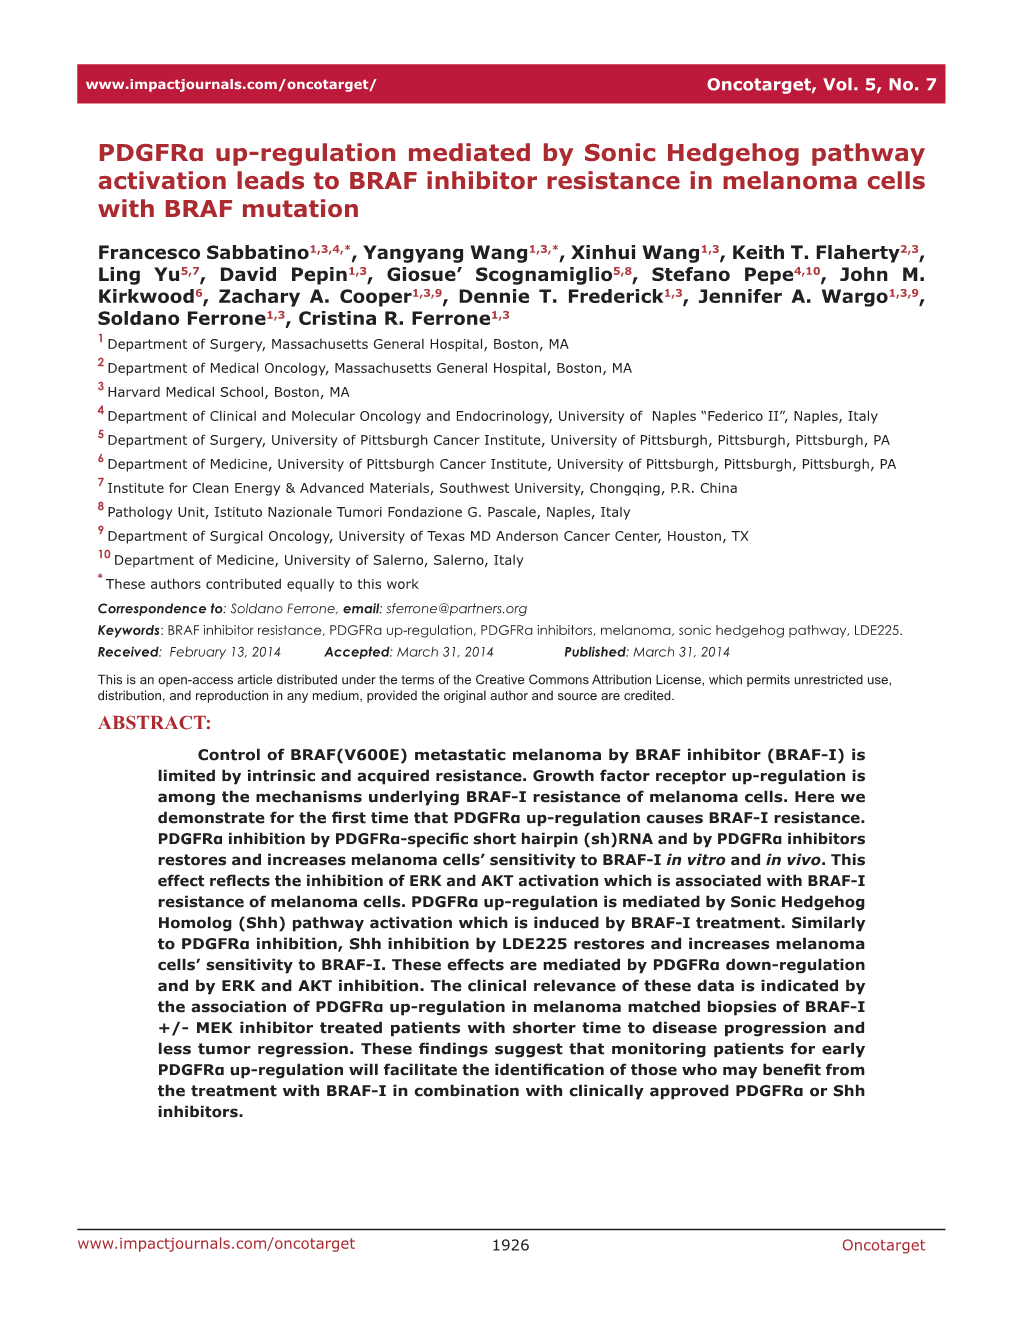 Pdgfrα Up-Regulation Mediated by Sonic Hedgehog Pathway Activation Leads to BRAF Inhibitor Resistance in Melanoma Cells with BRAF Mutation